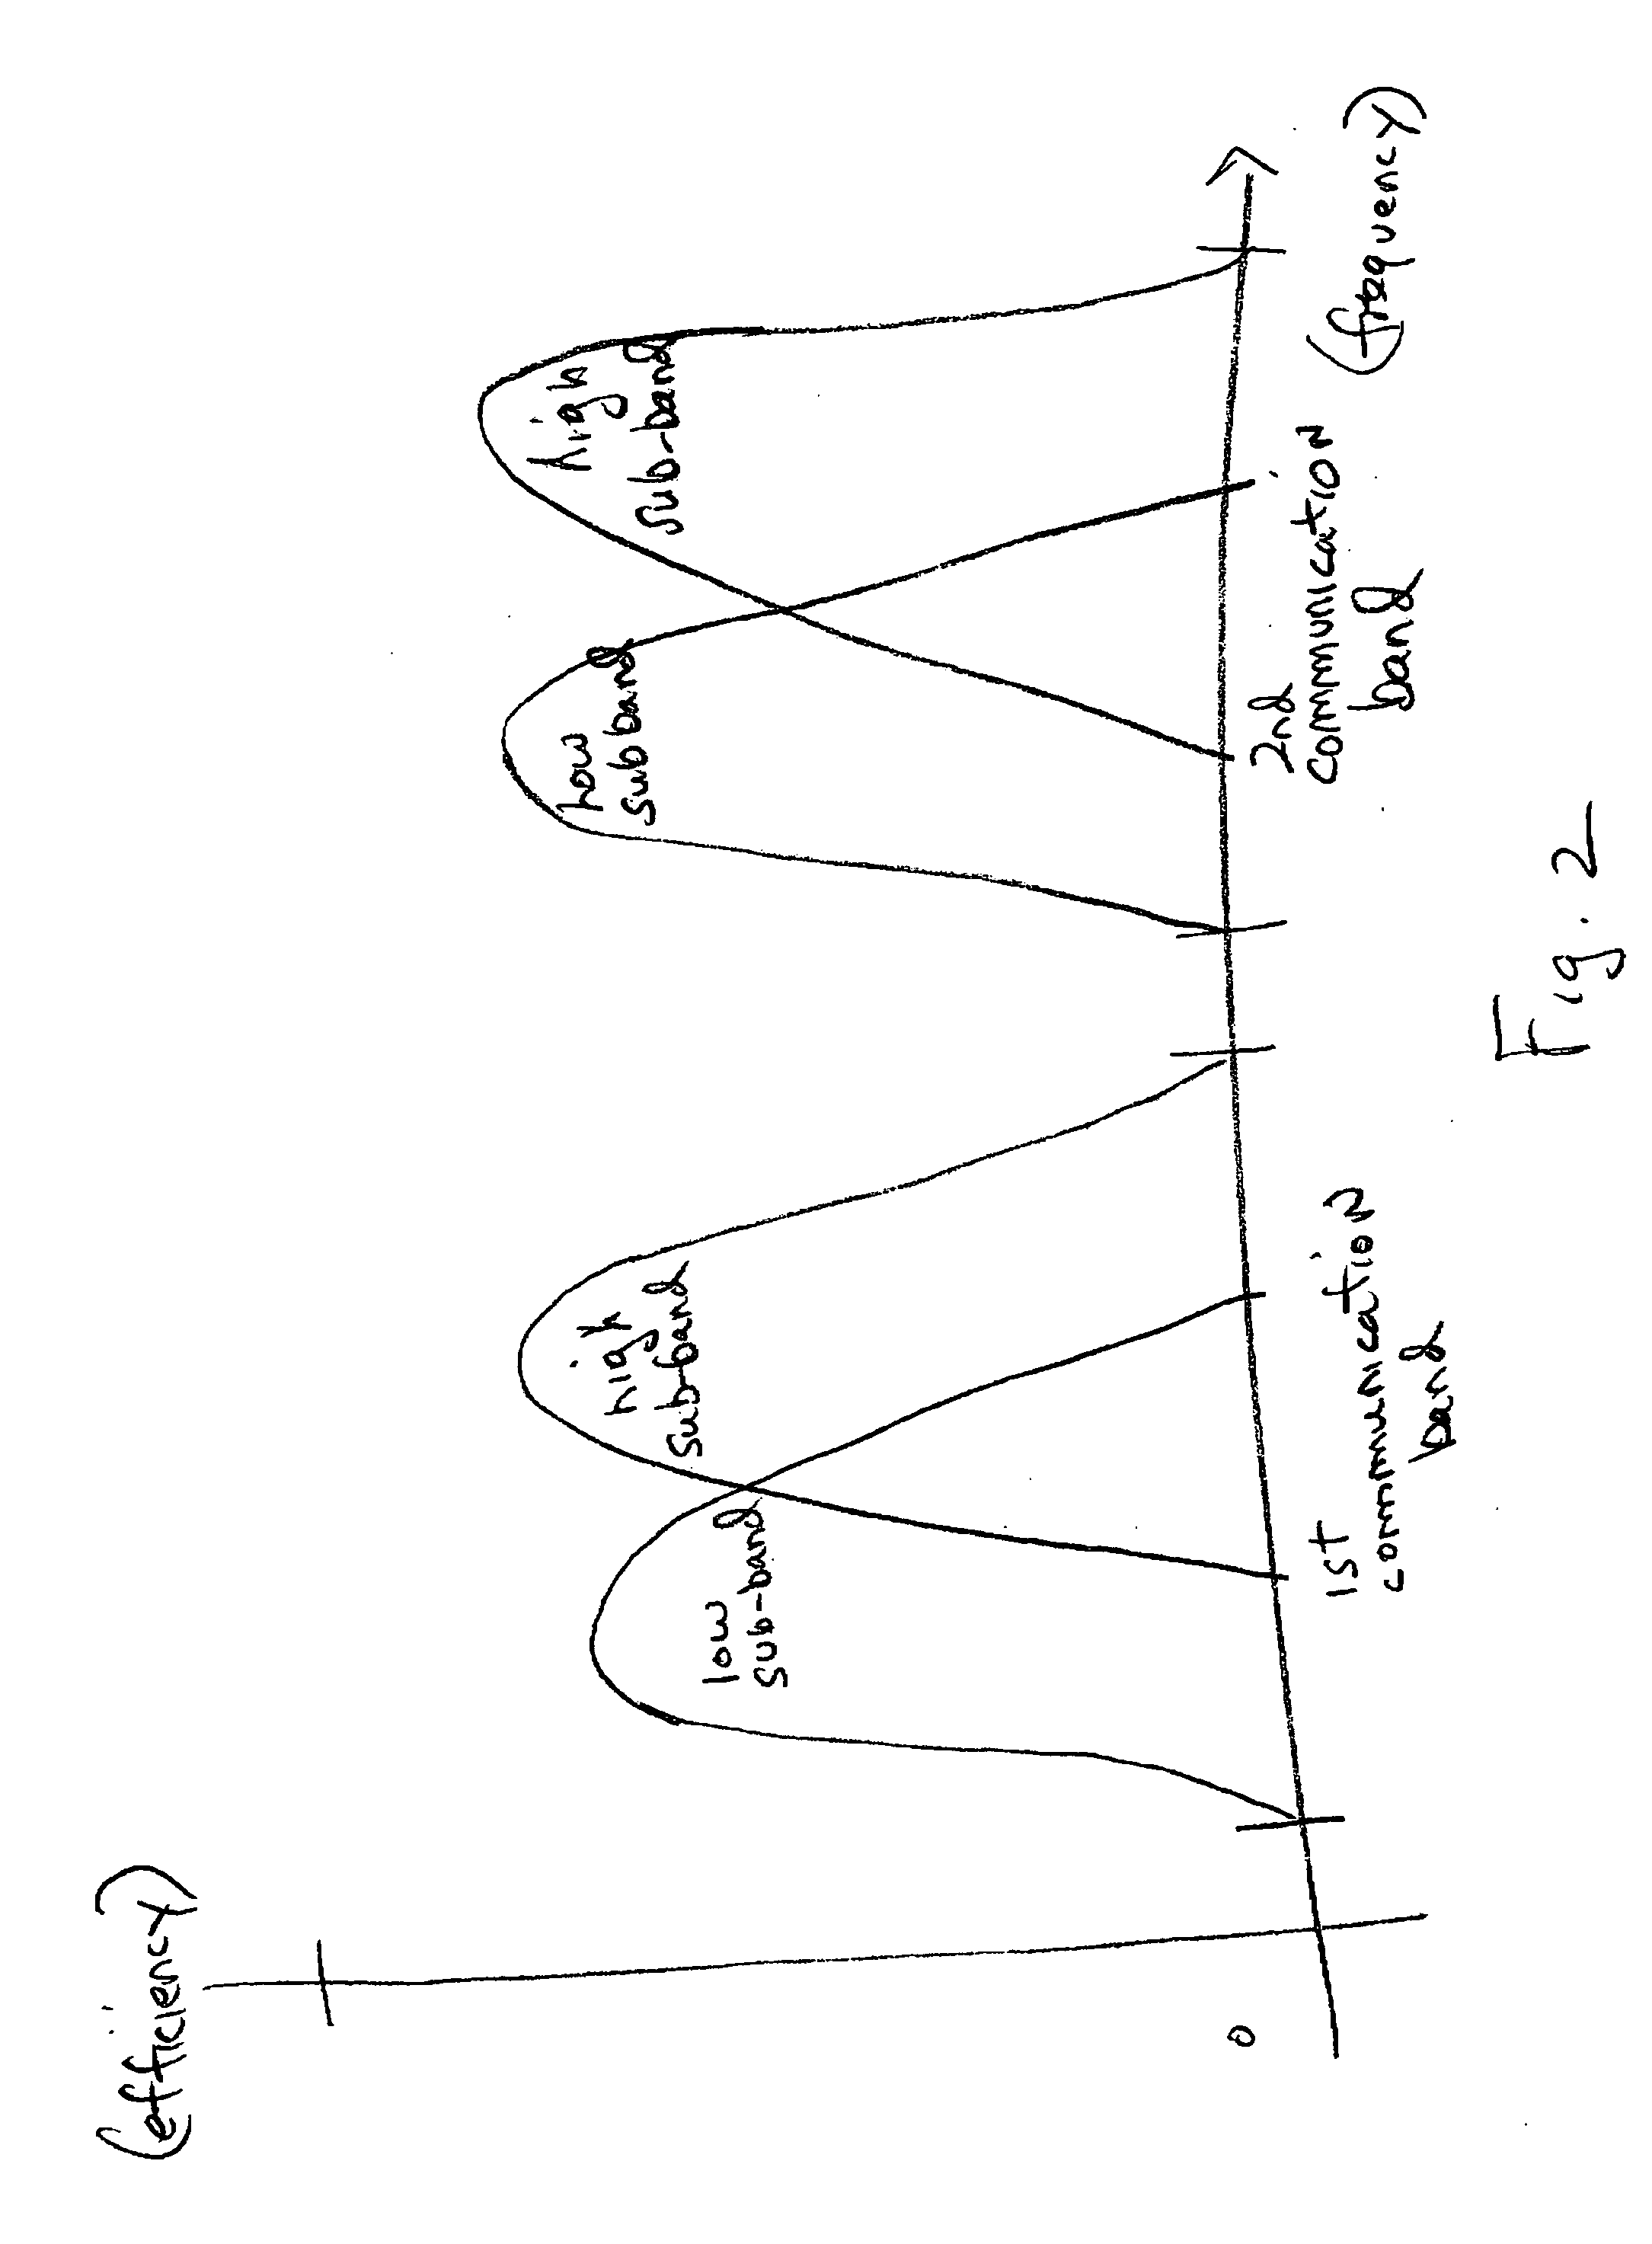 System and method for impedance matching an antenna to sub-bands in a communication band